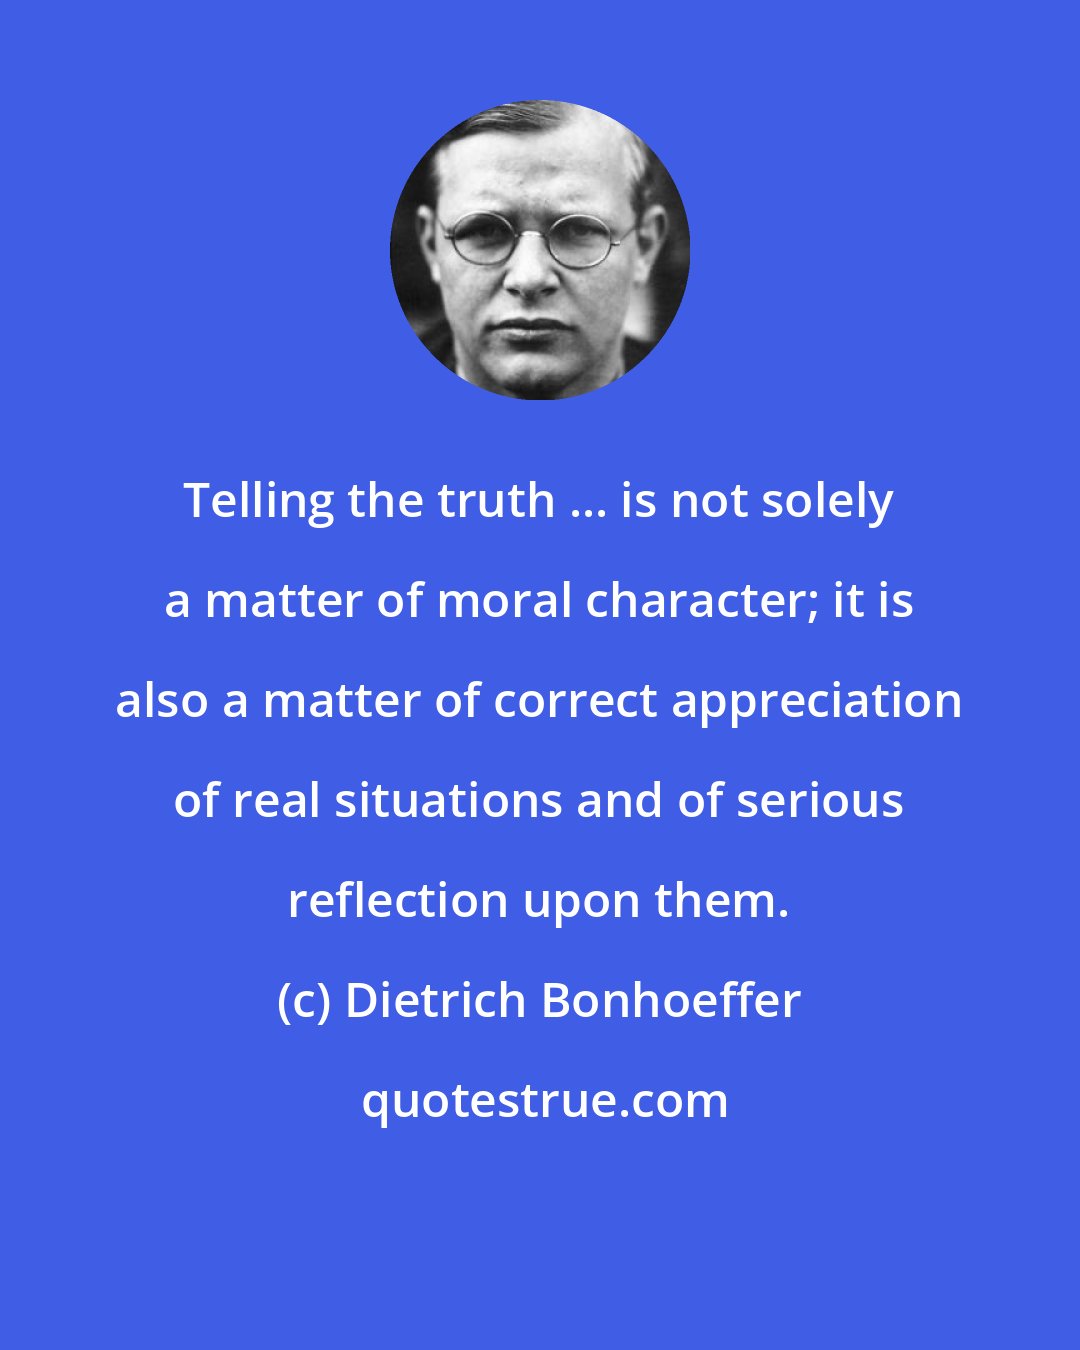 Dietrich Bonhoeffer: Telling the truth ... is not solely a matter of moral character; it is also a matter of correct appreciation of real situations and of serious reflection upon them.